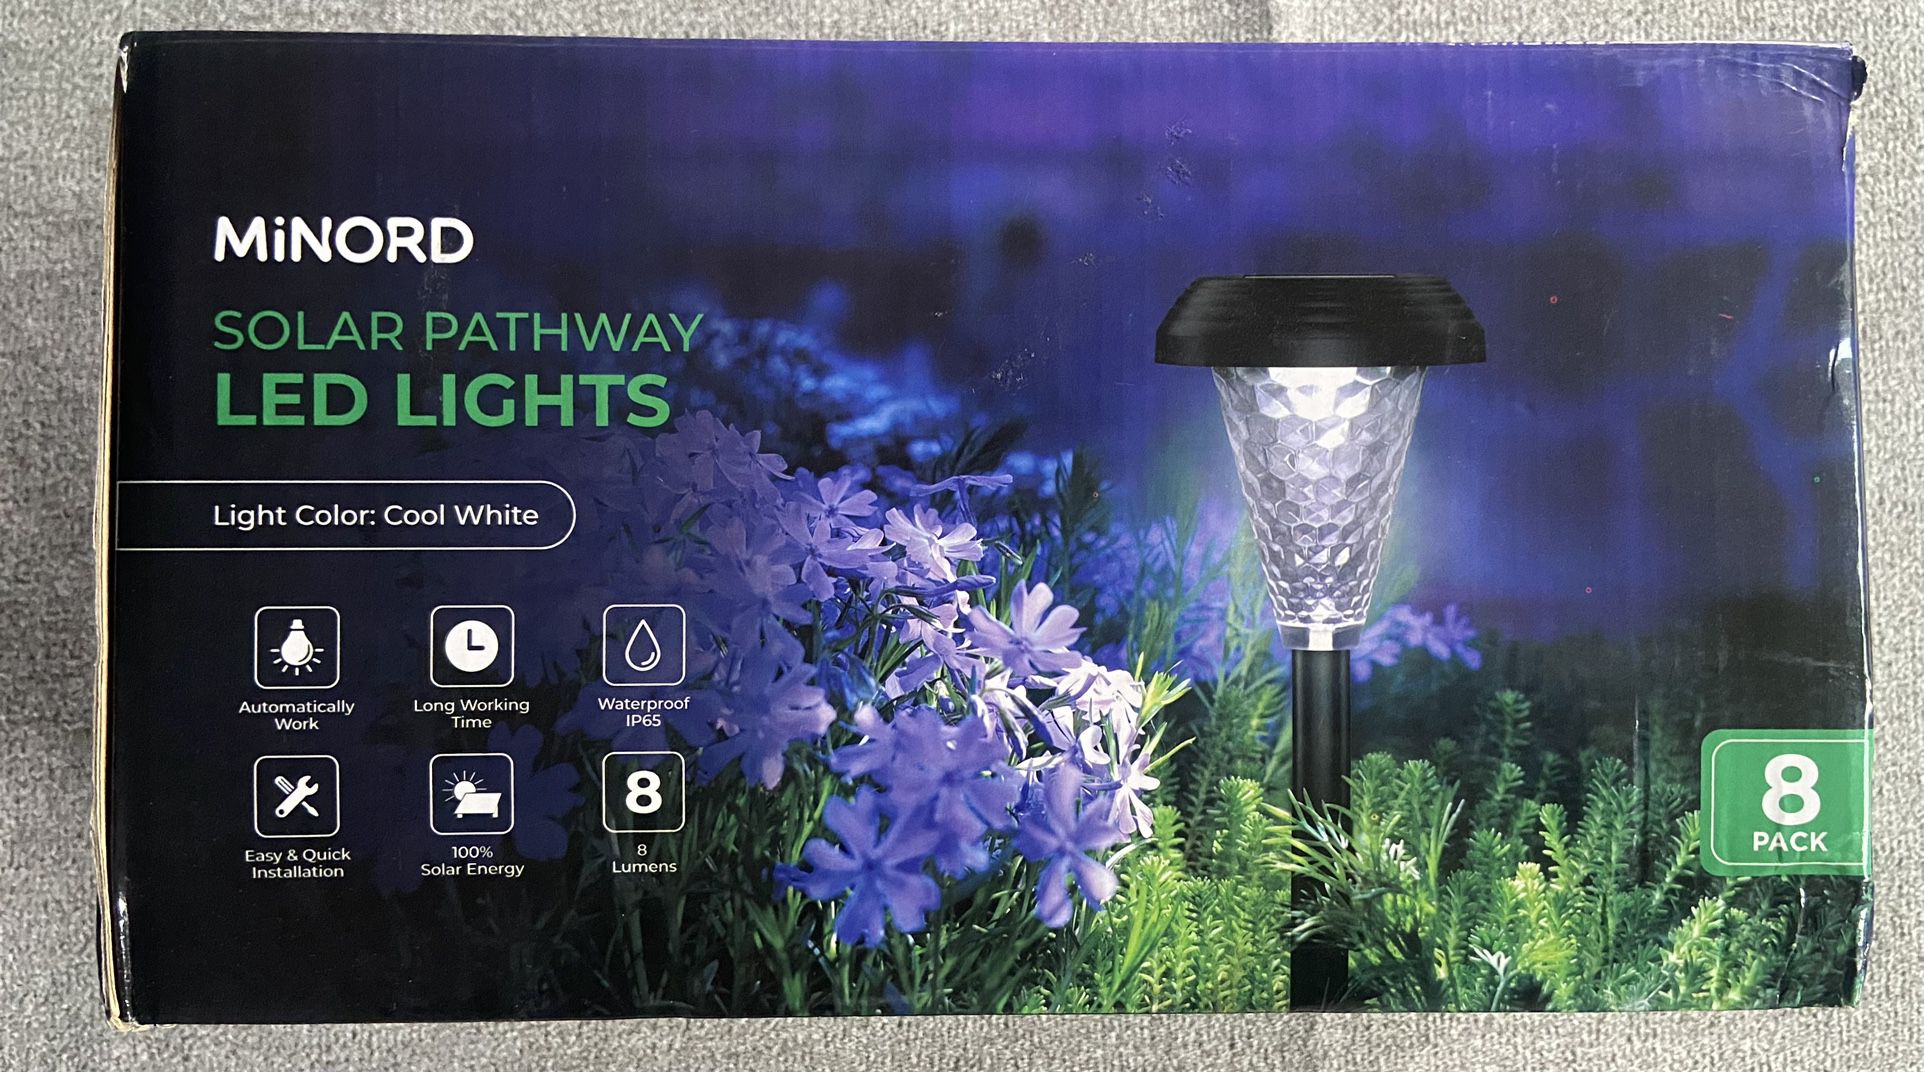 Minord Glass Solar Lights Outdoor Garden Up to 12H Long Last Super Bright, Waterproof LED Pathway Lights Solar Powered, Auto On/Off 